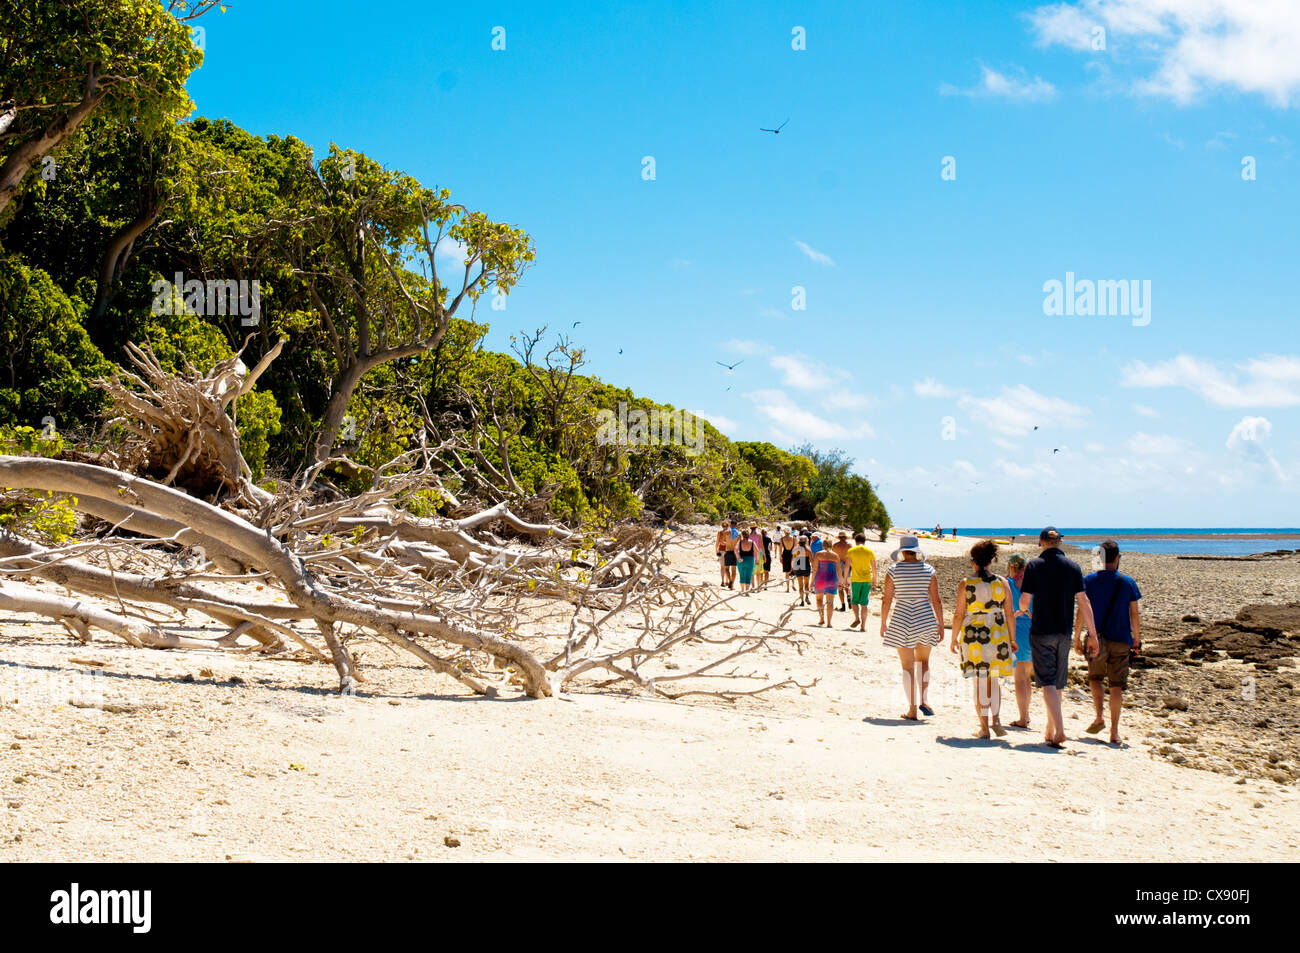 Lady Musgrave Island Banque D'Images